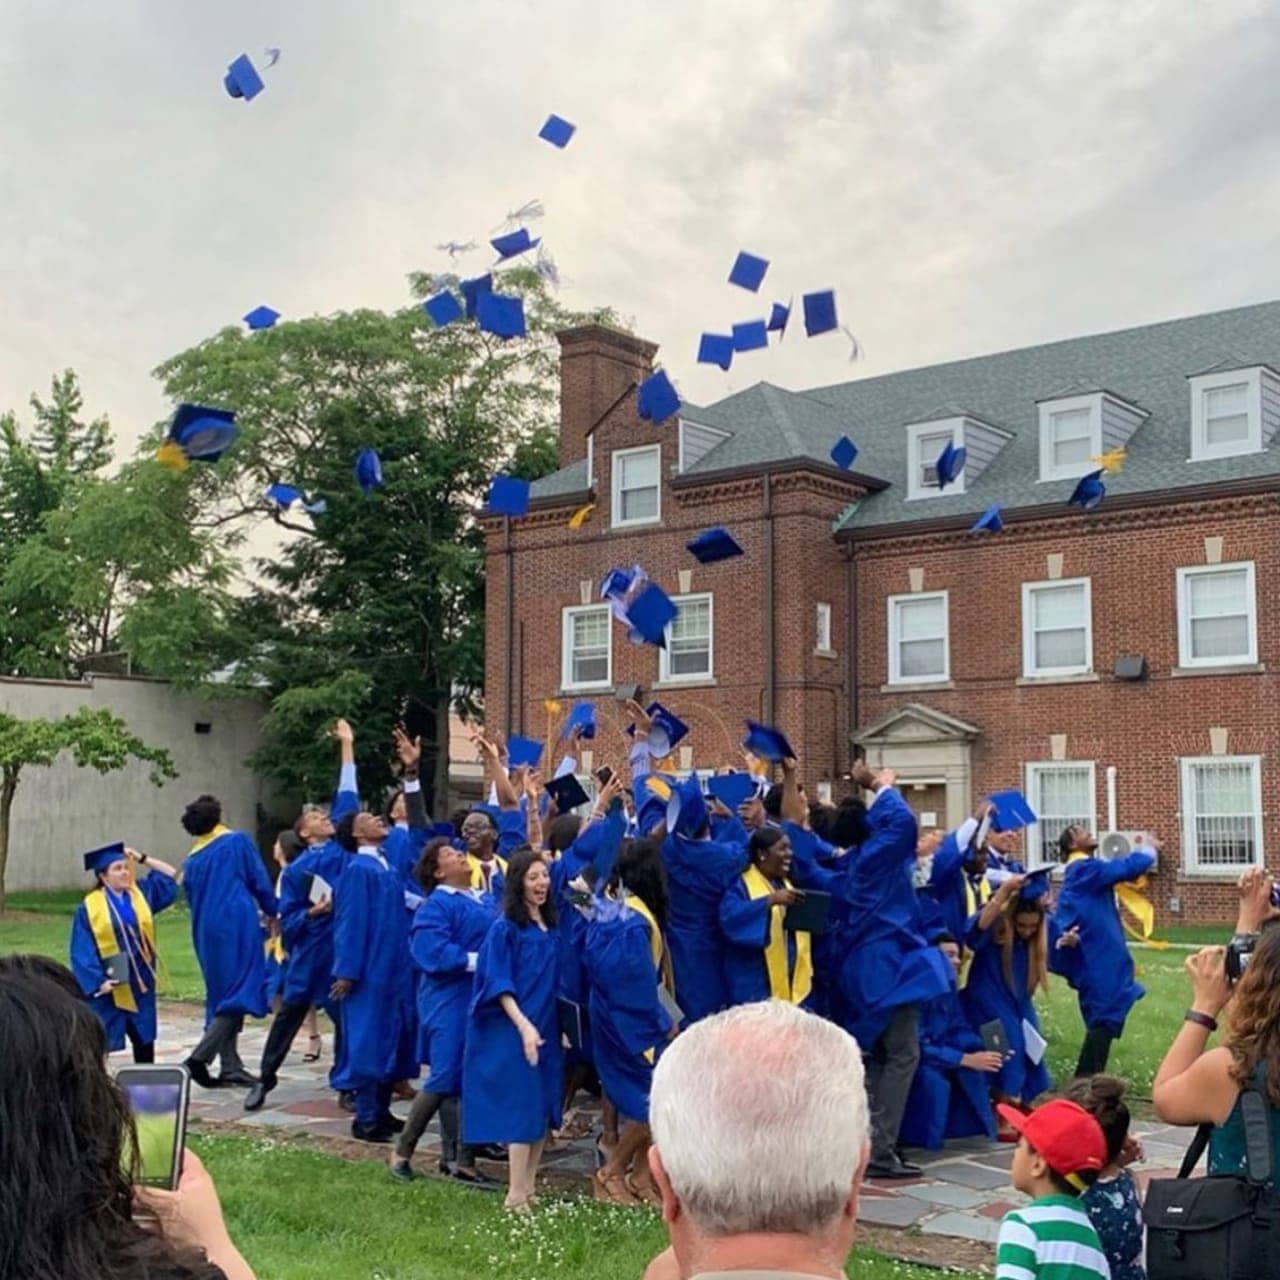 The Class of 2019 at St. Mary of the Assumption in Elizabeth